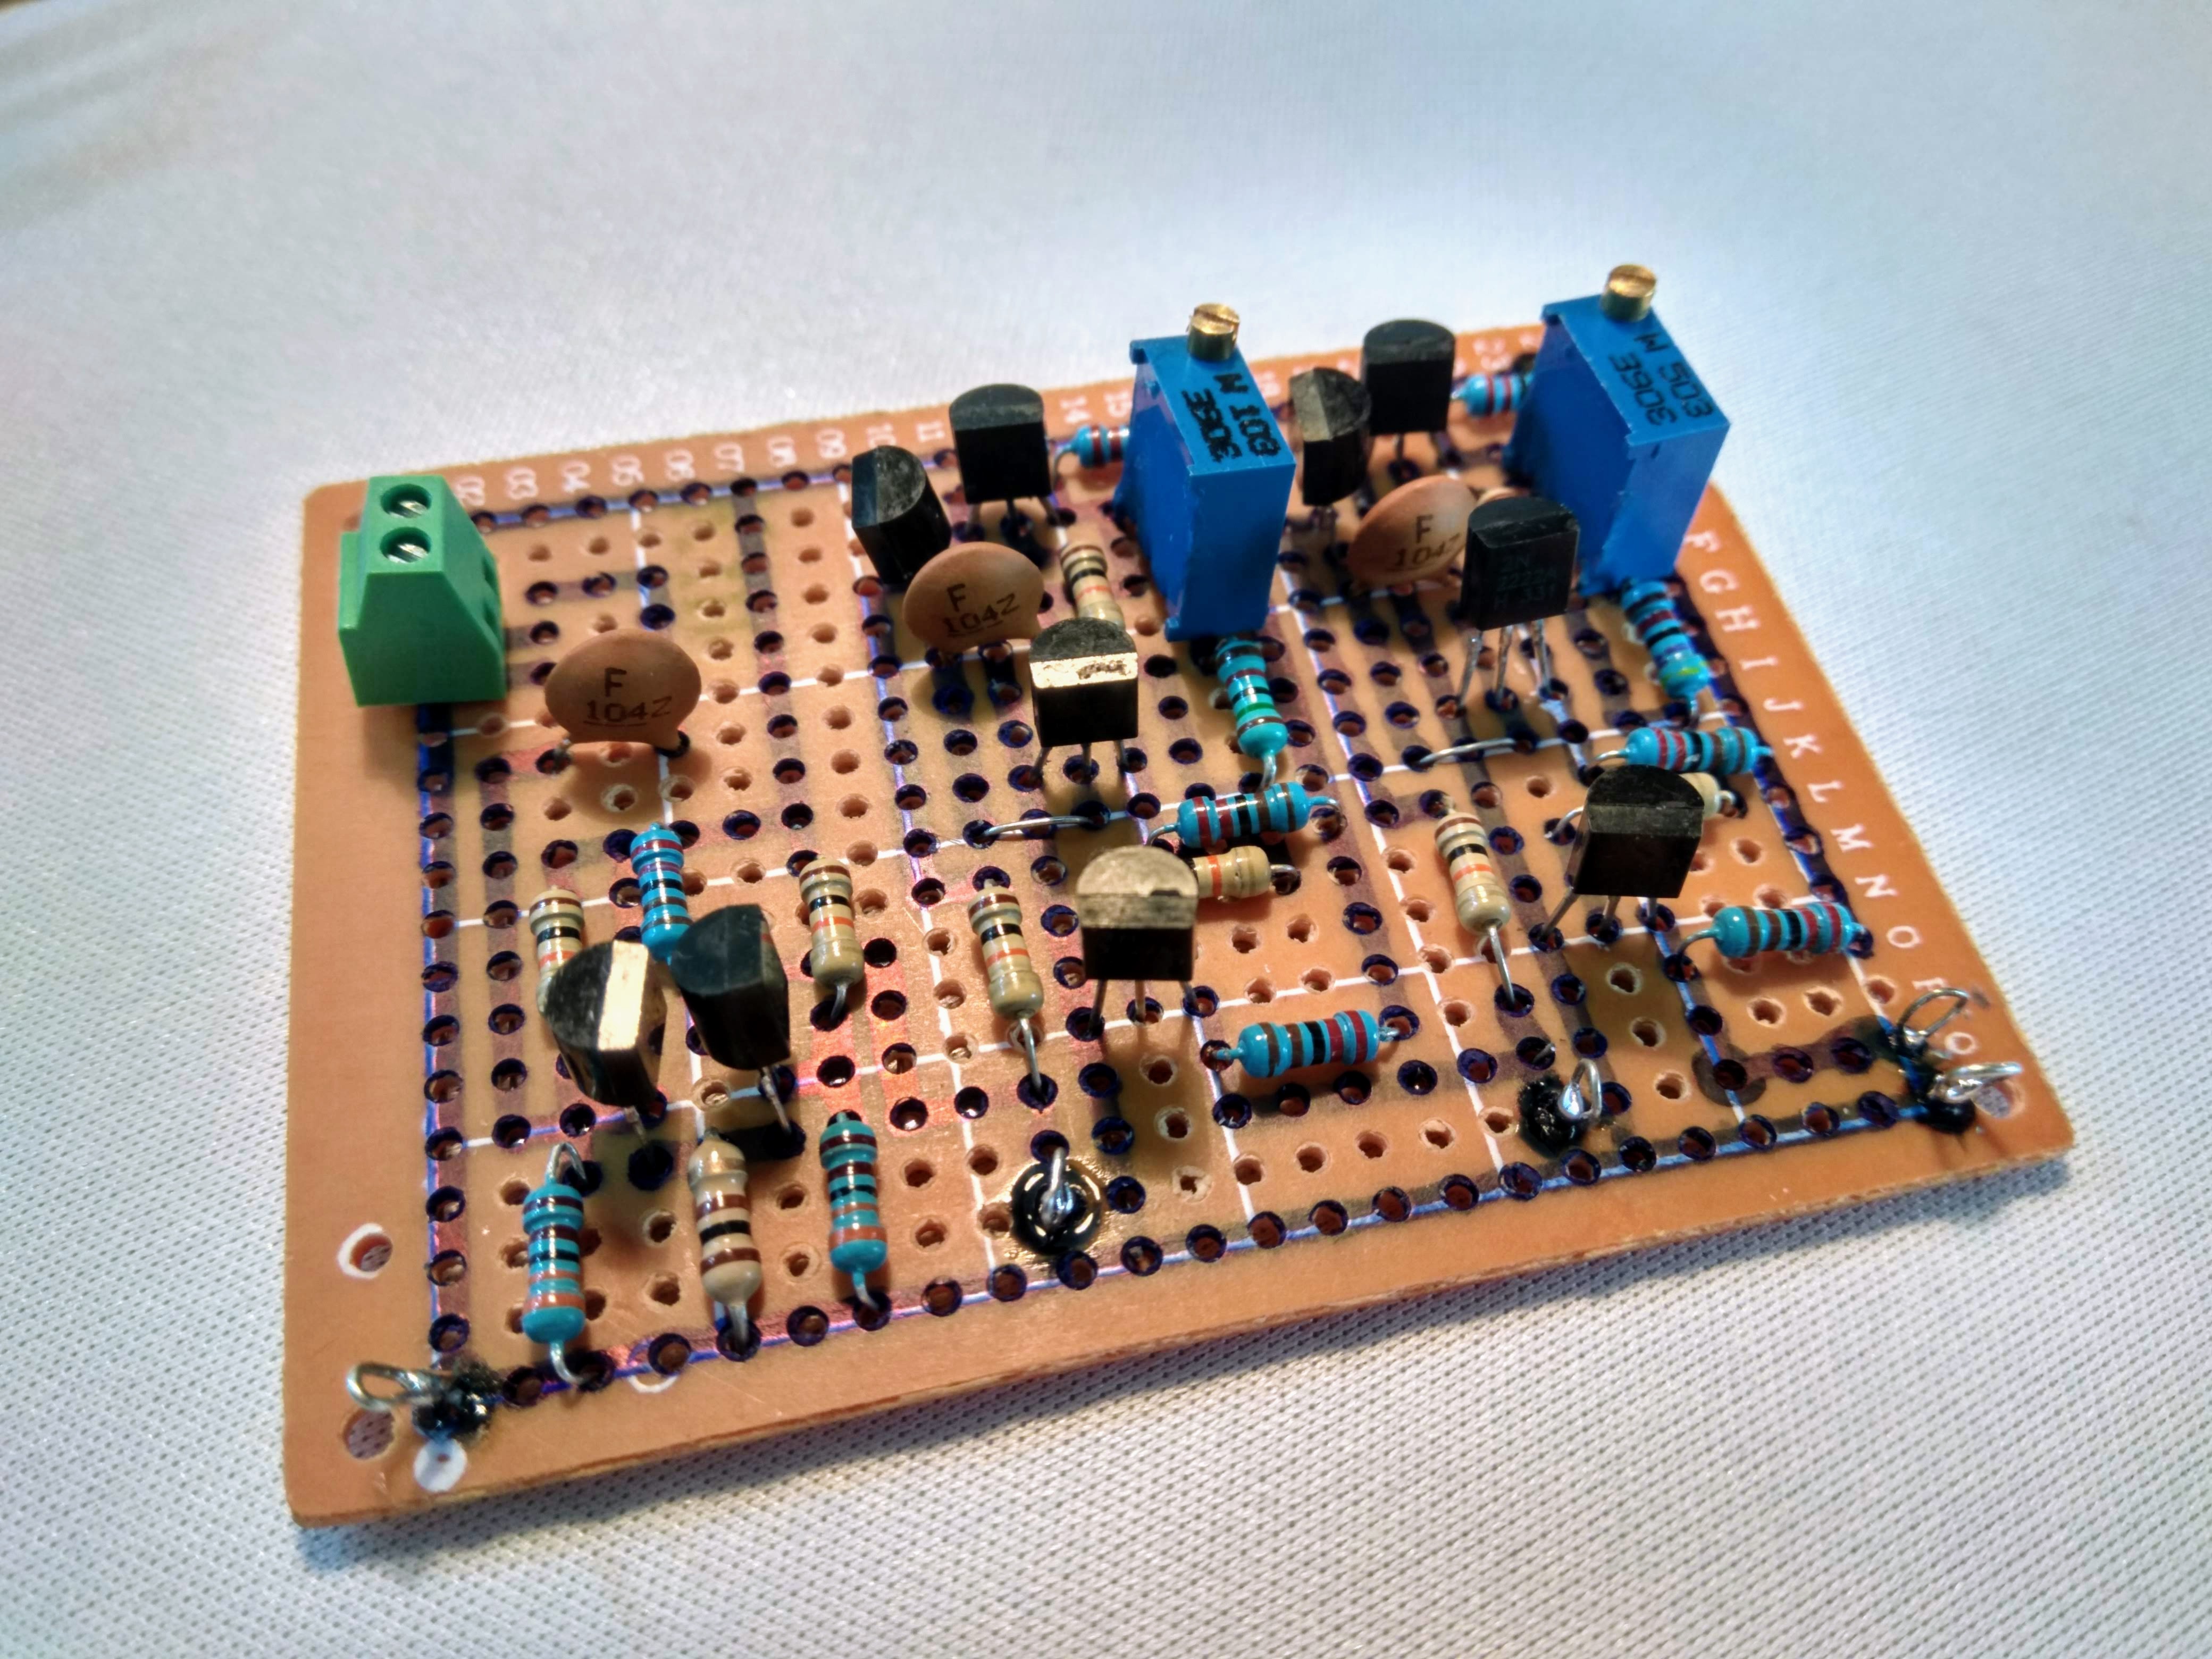 Soldered Audio-to-Serial converter PCB